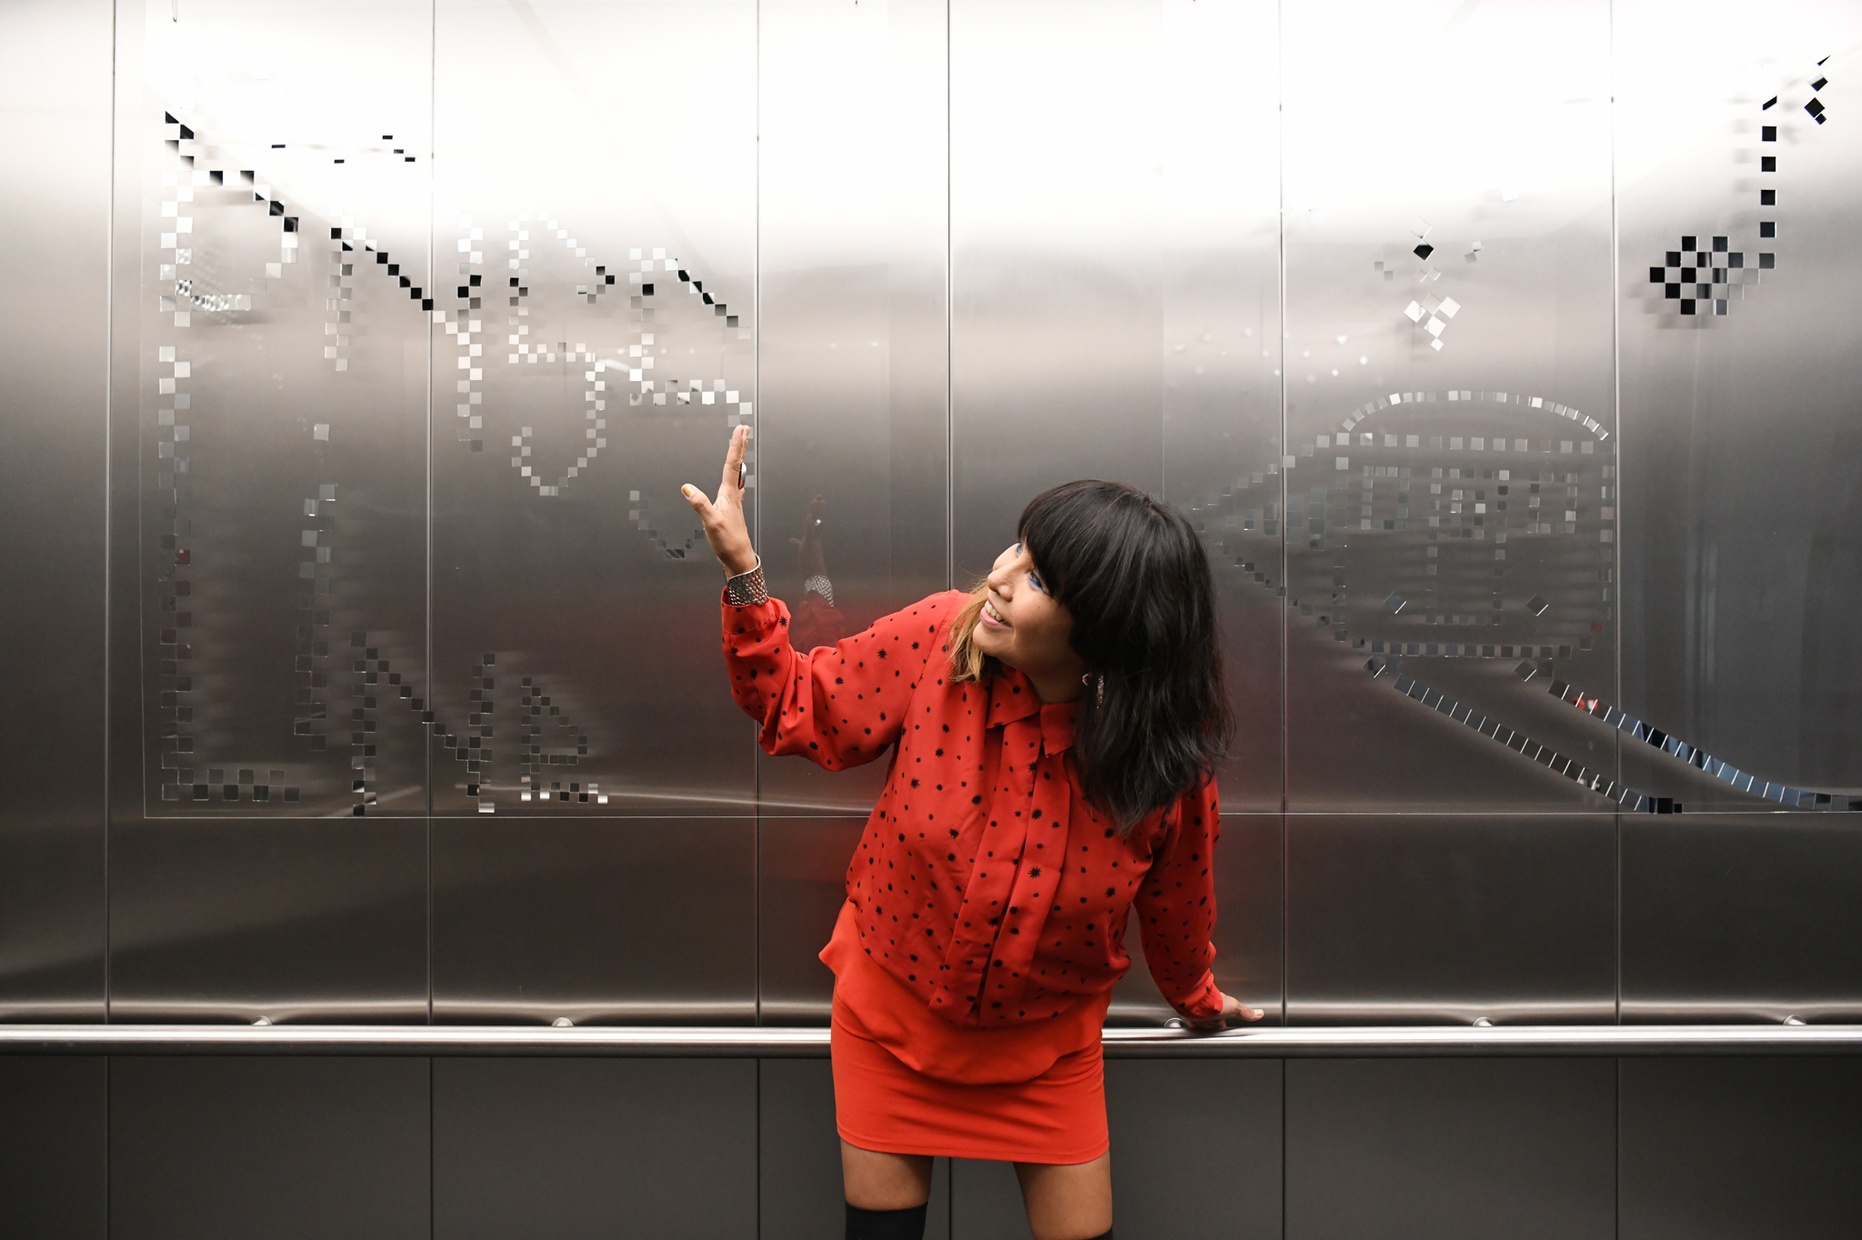 A dark-haired woman wearing a red dress looks and gestures with one arm at a pattern on the wall behind her.